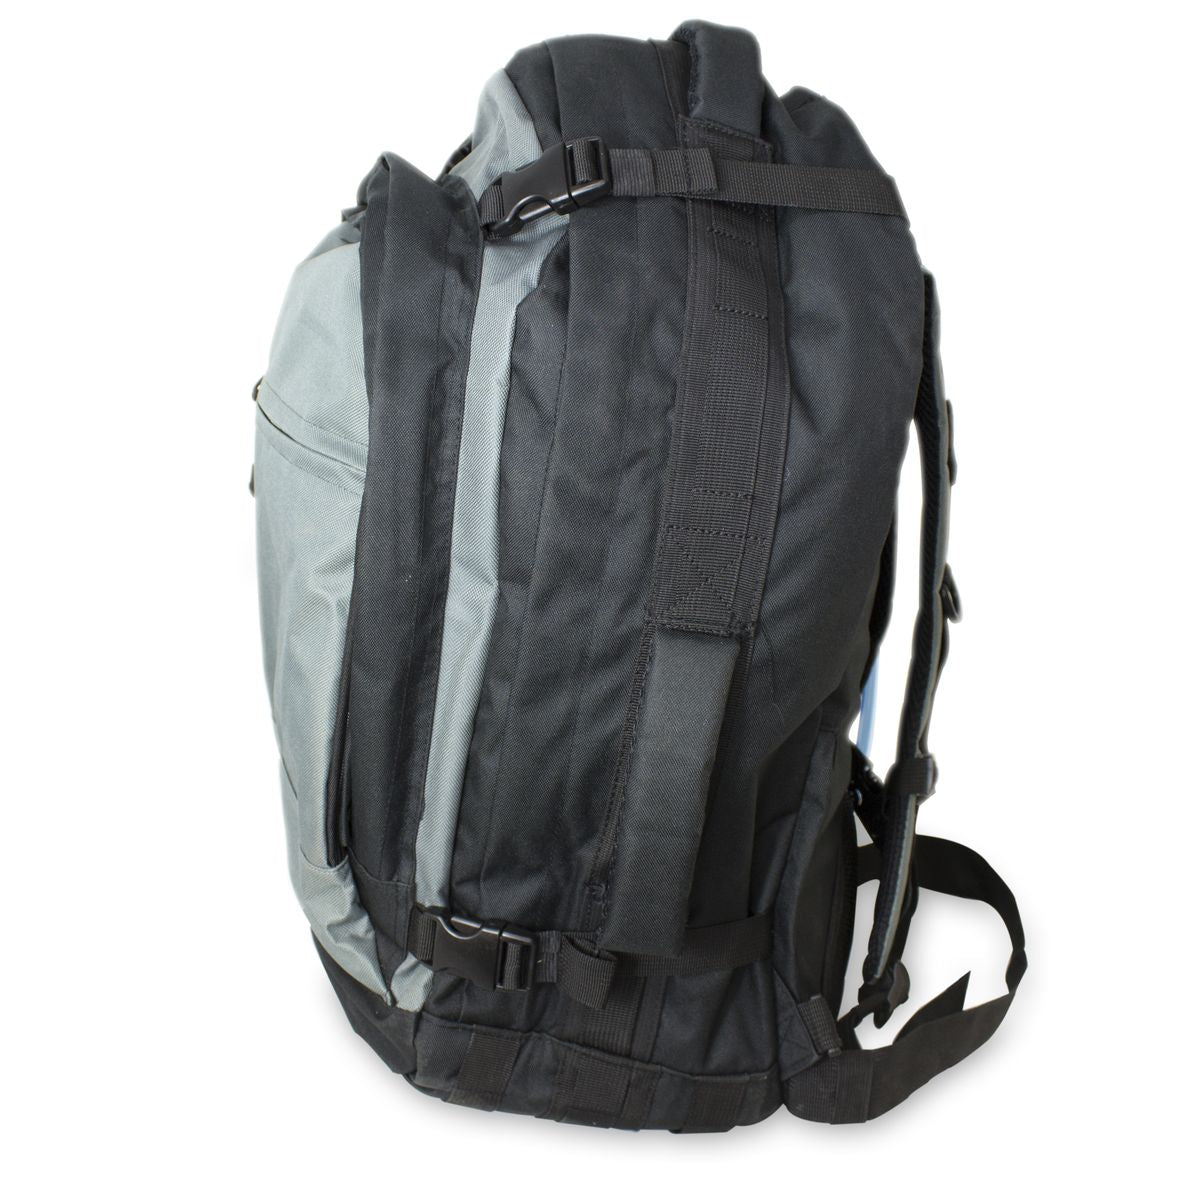 Hiking Tactical Backpack with Water Hydration Bladder